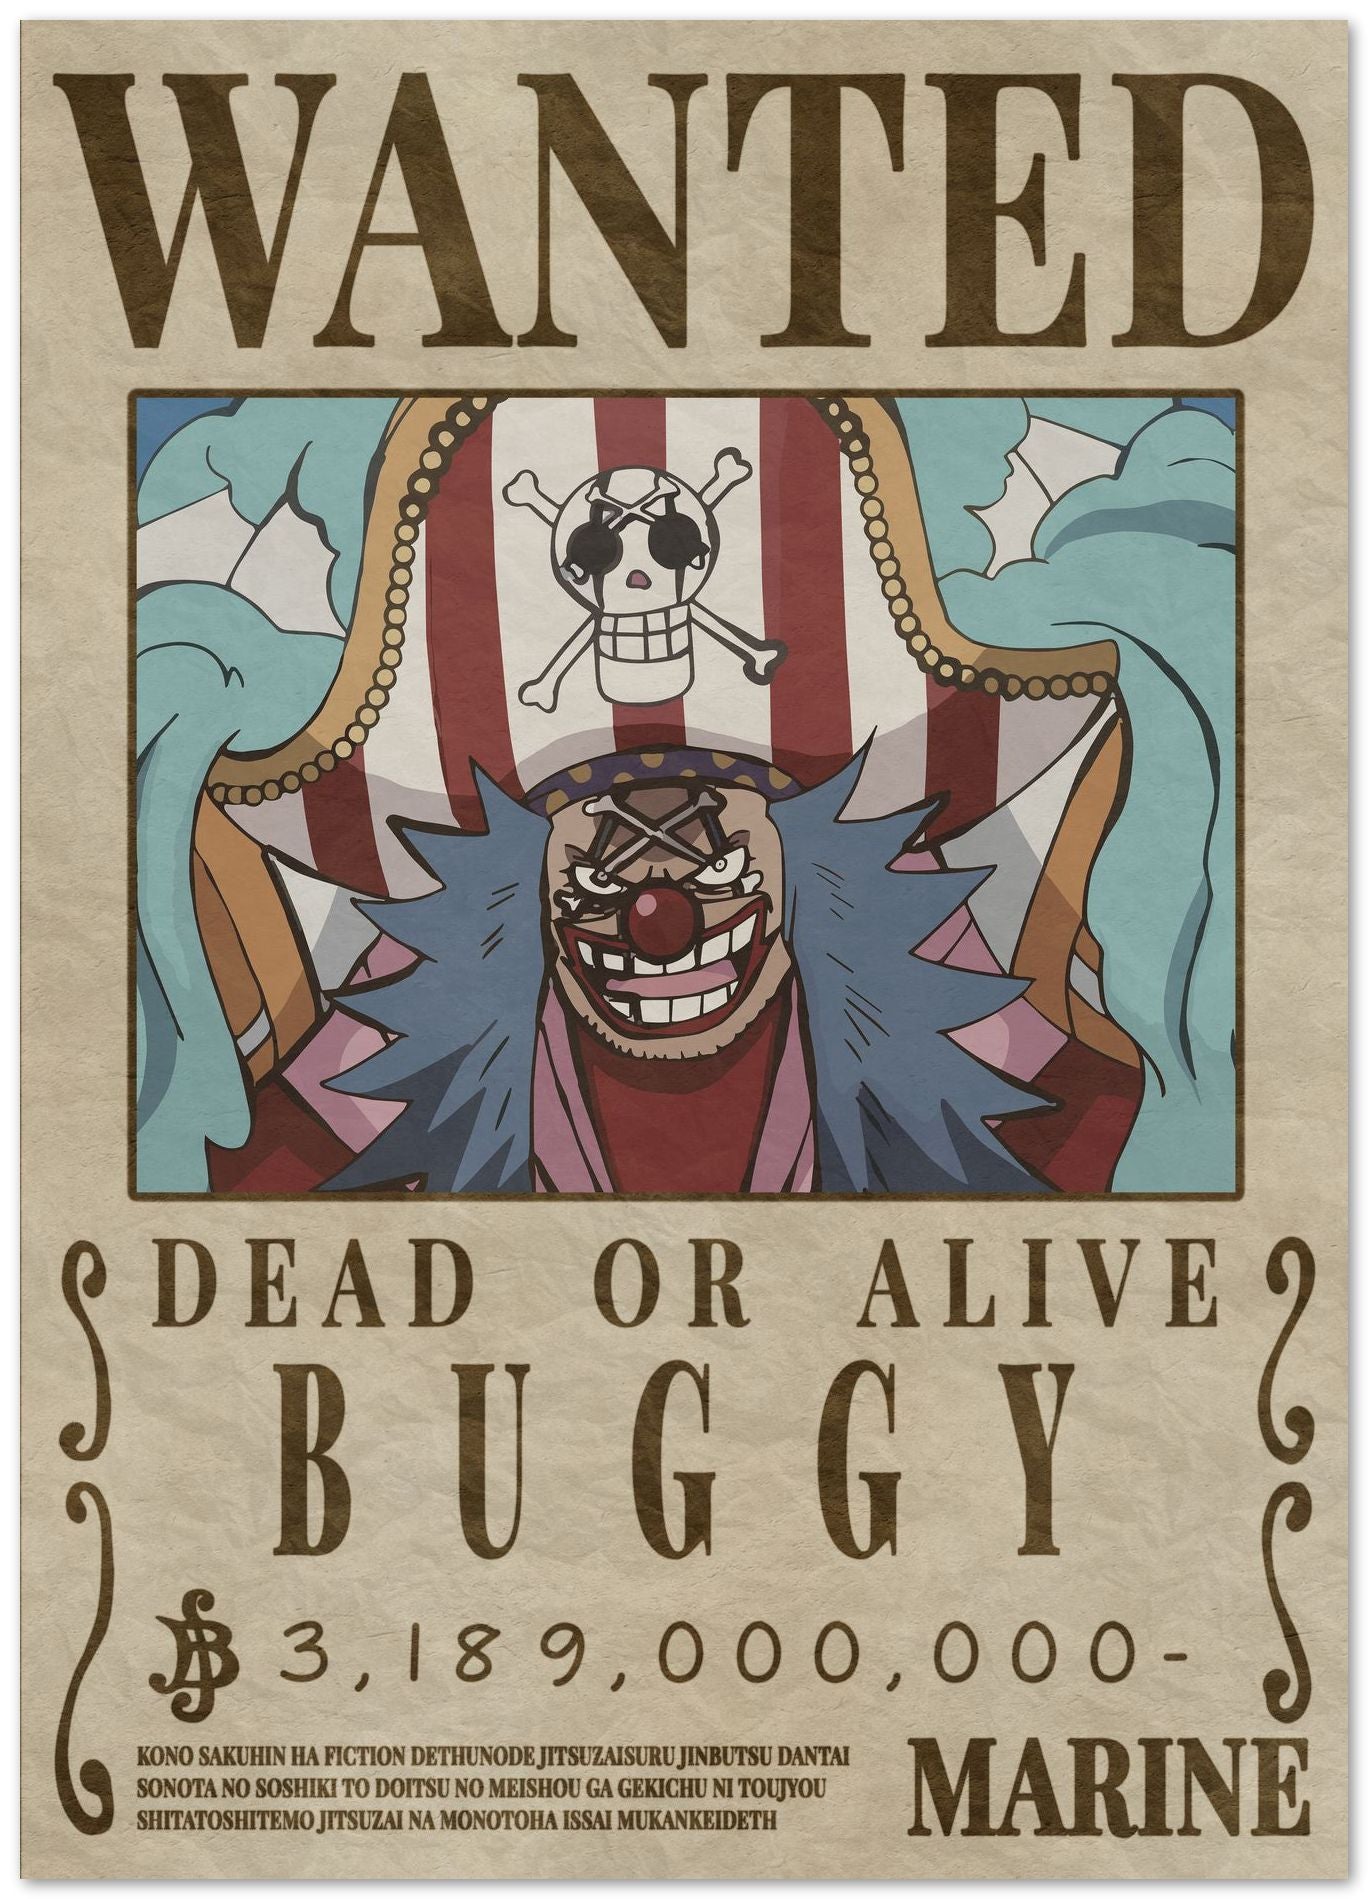 One Piece Buggy - @Hollycube